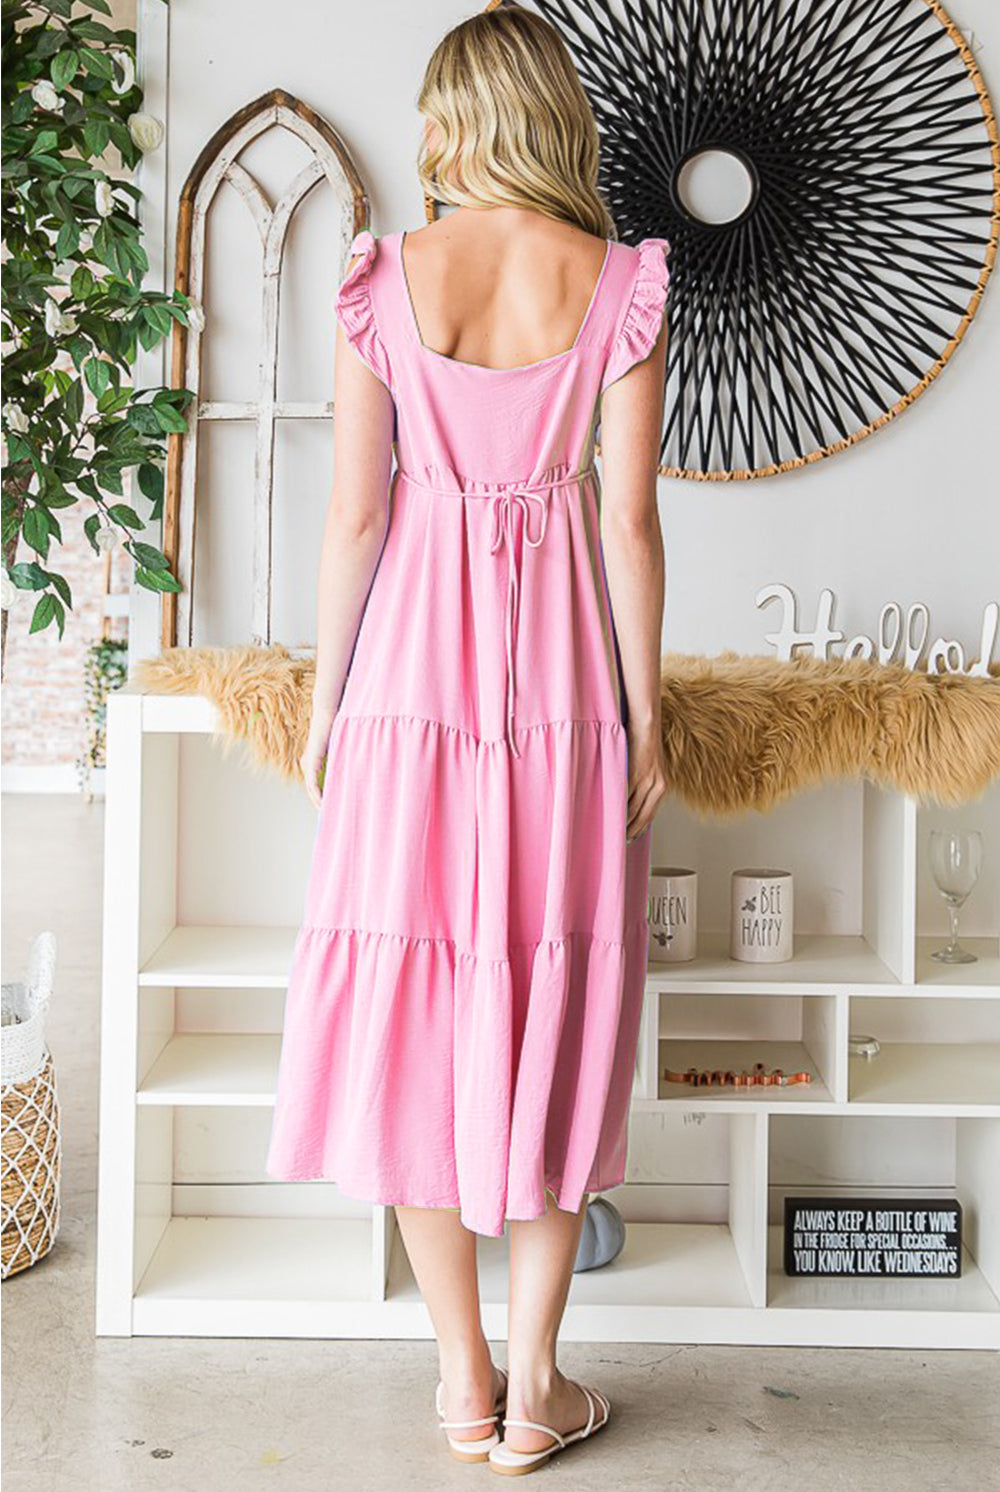 A smiling woman looks radiant in a blush pink ruffle tiered midi dress, which exudes summer charm with its flouncy sleeves and flowing skirt, complemented by white slide sandals.